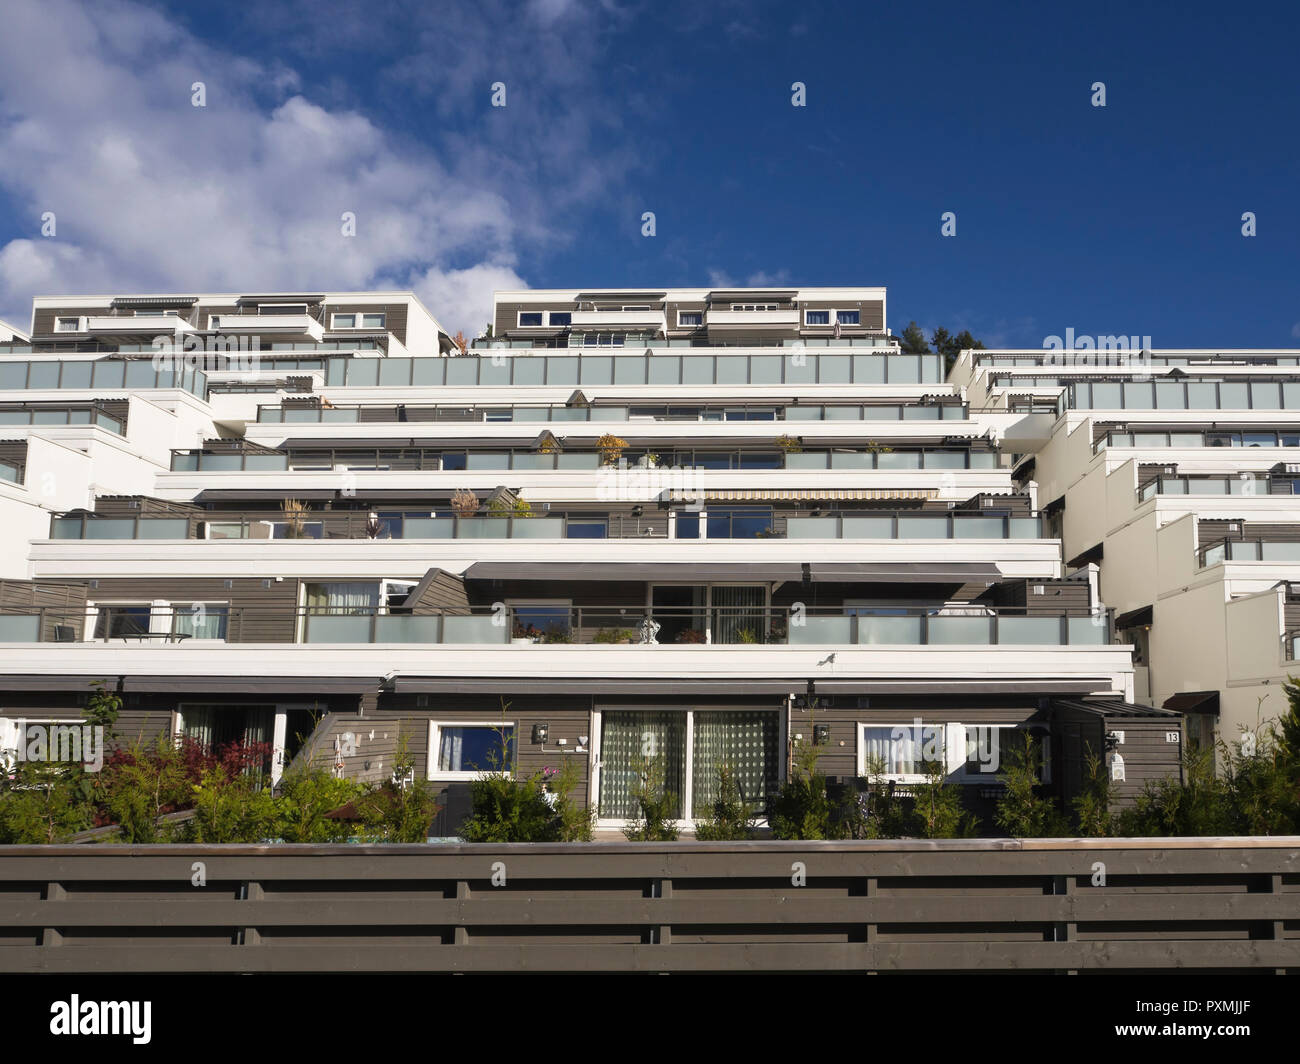 Terraced apartment block in the suburb of Holmlia in Oslo Noway, popular architecture with large terraces and flowerboxes Stock Photo